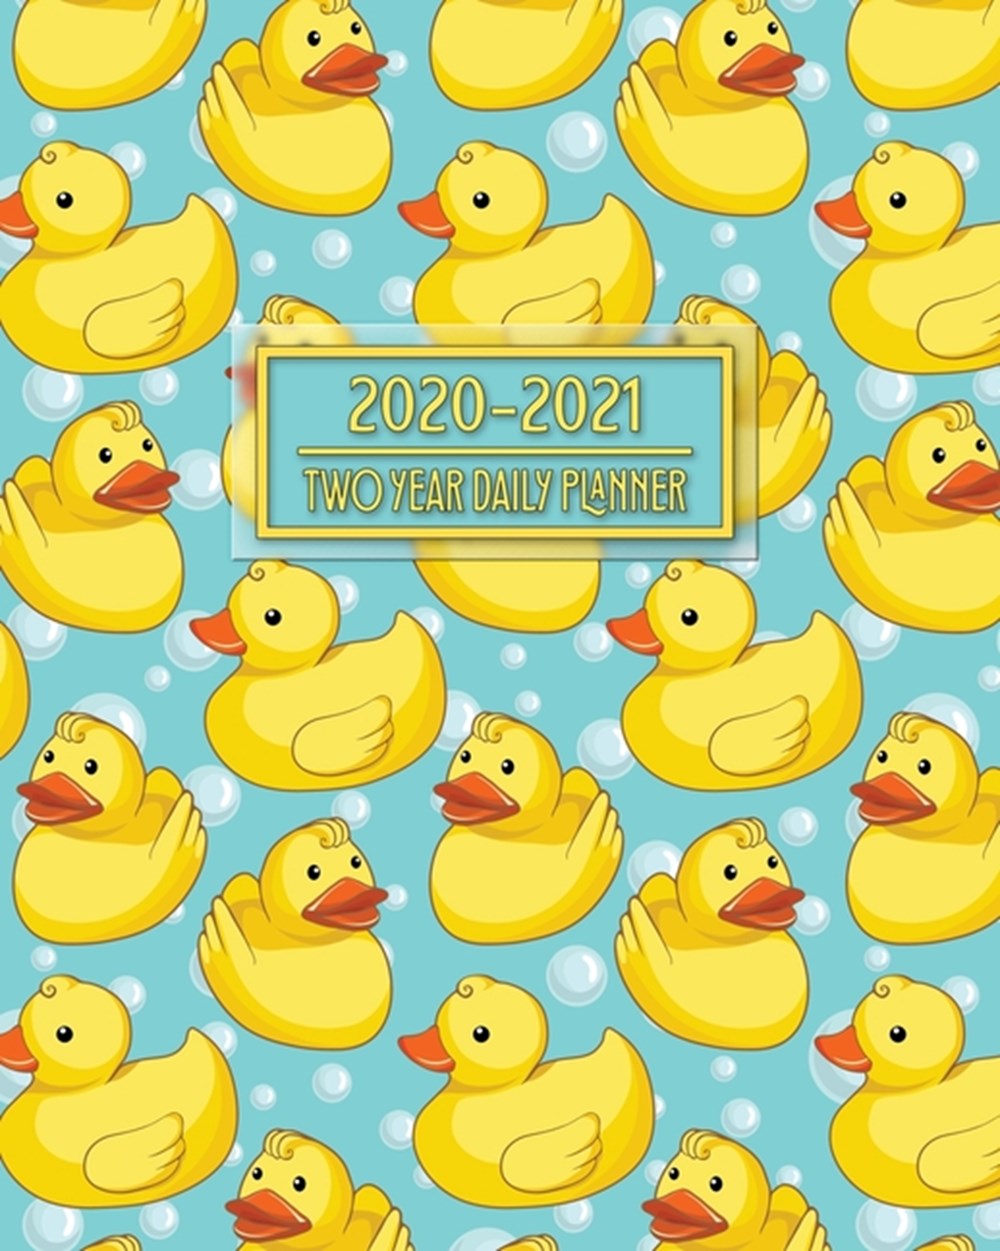 2020-2021 Two Year Daily Planner Sweet Rubber Duckies Great Gift For New Parents Kids Newborn Infant